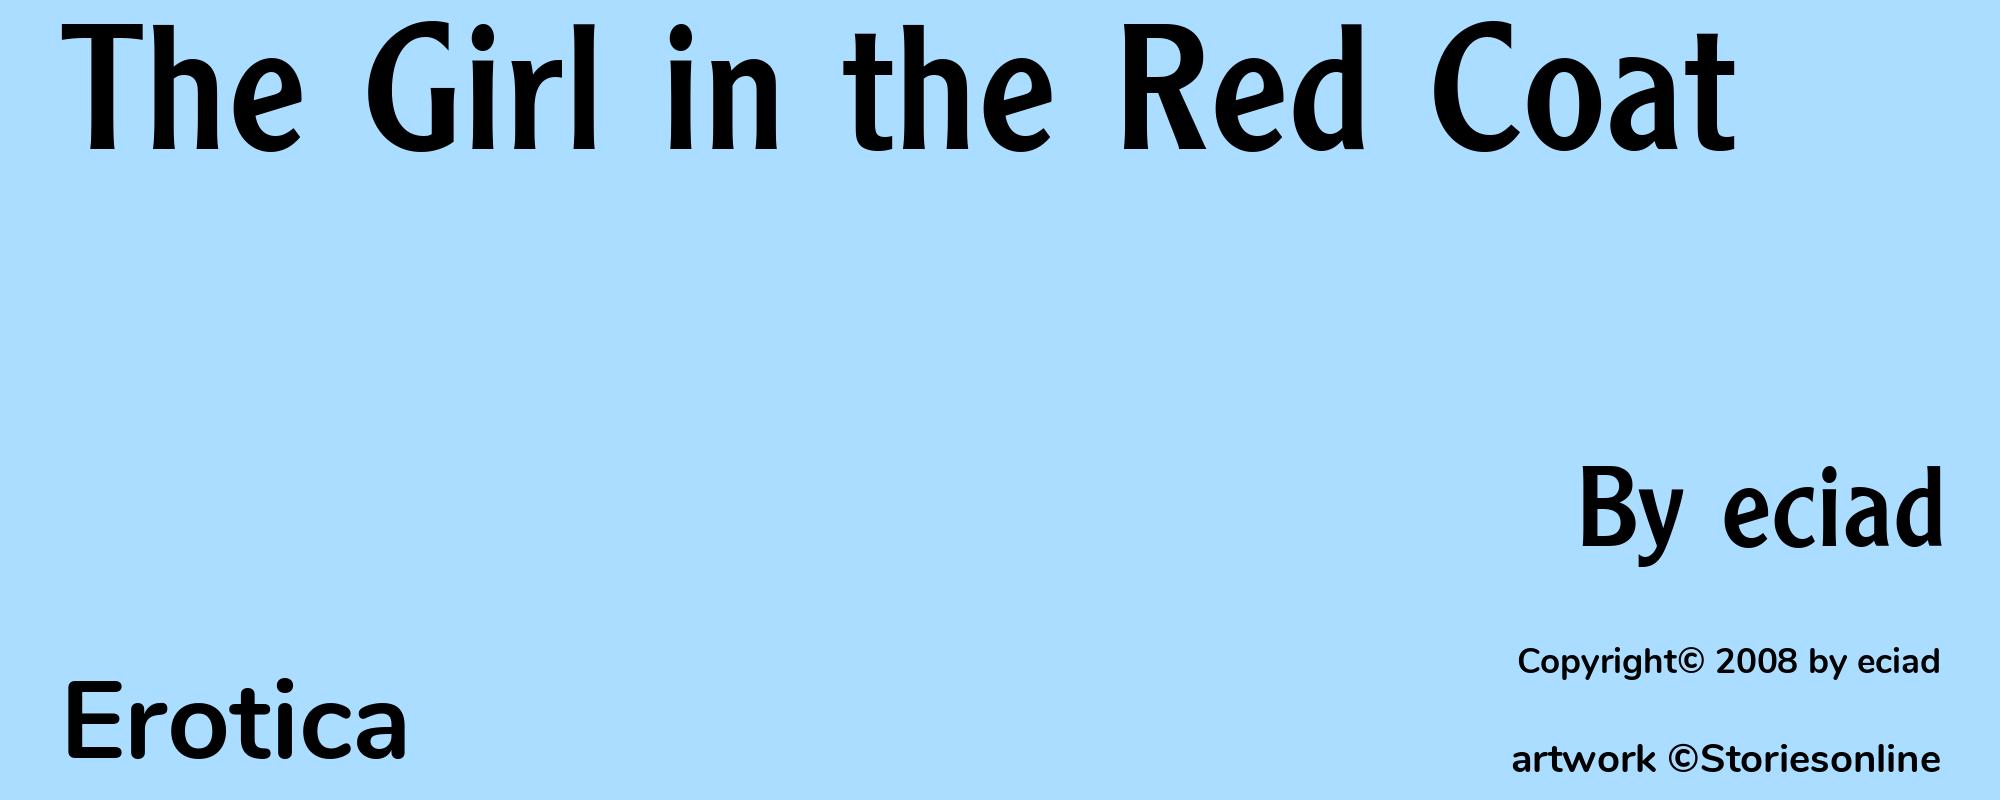 The Girl in the Red Coat - Cover